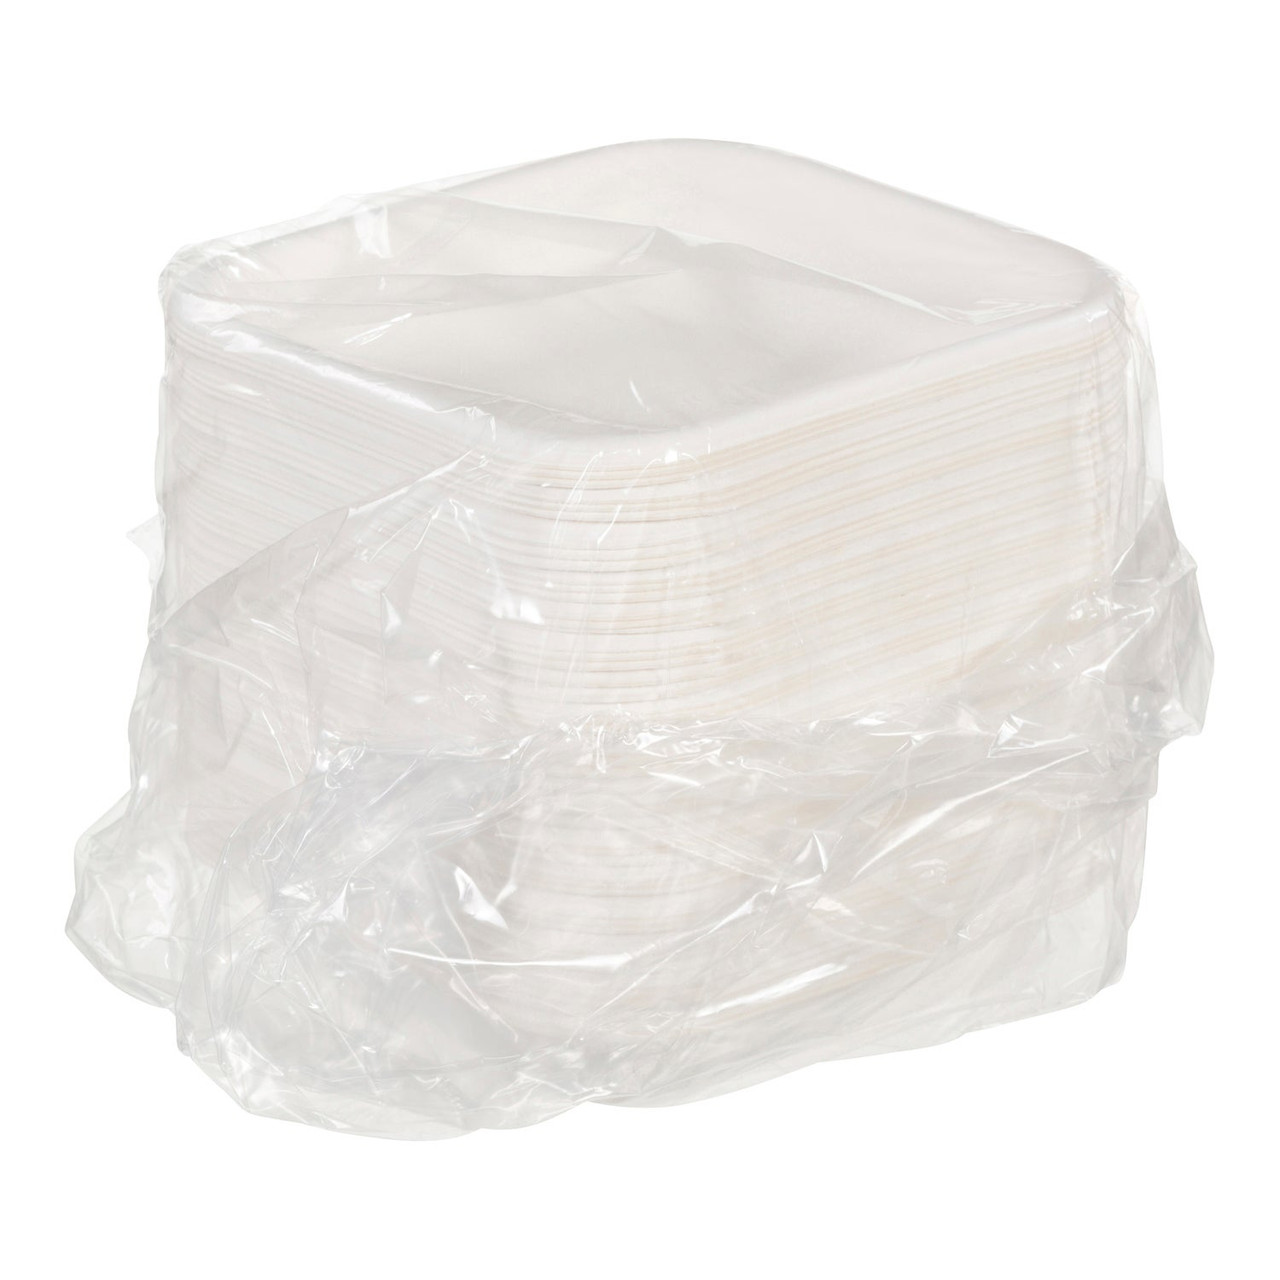 Greenstripe White Paper Square Bagasse Containers, 5In, Ecology Friendly | 50UN/Unit, 16 Units/Case